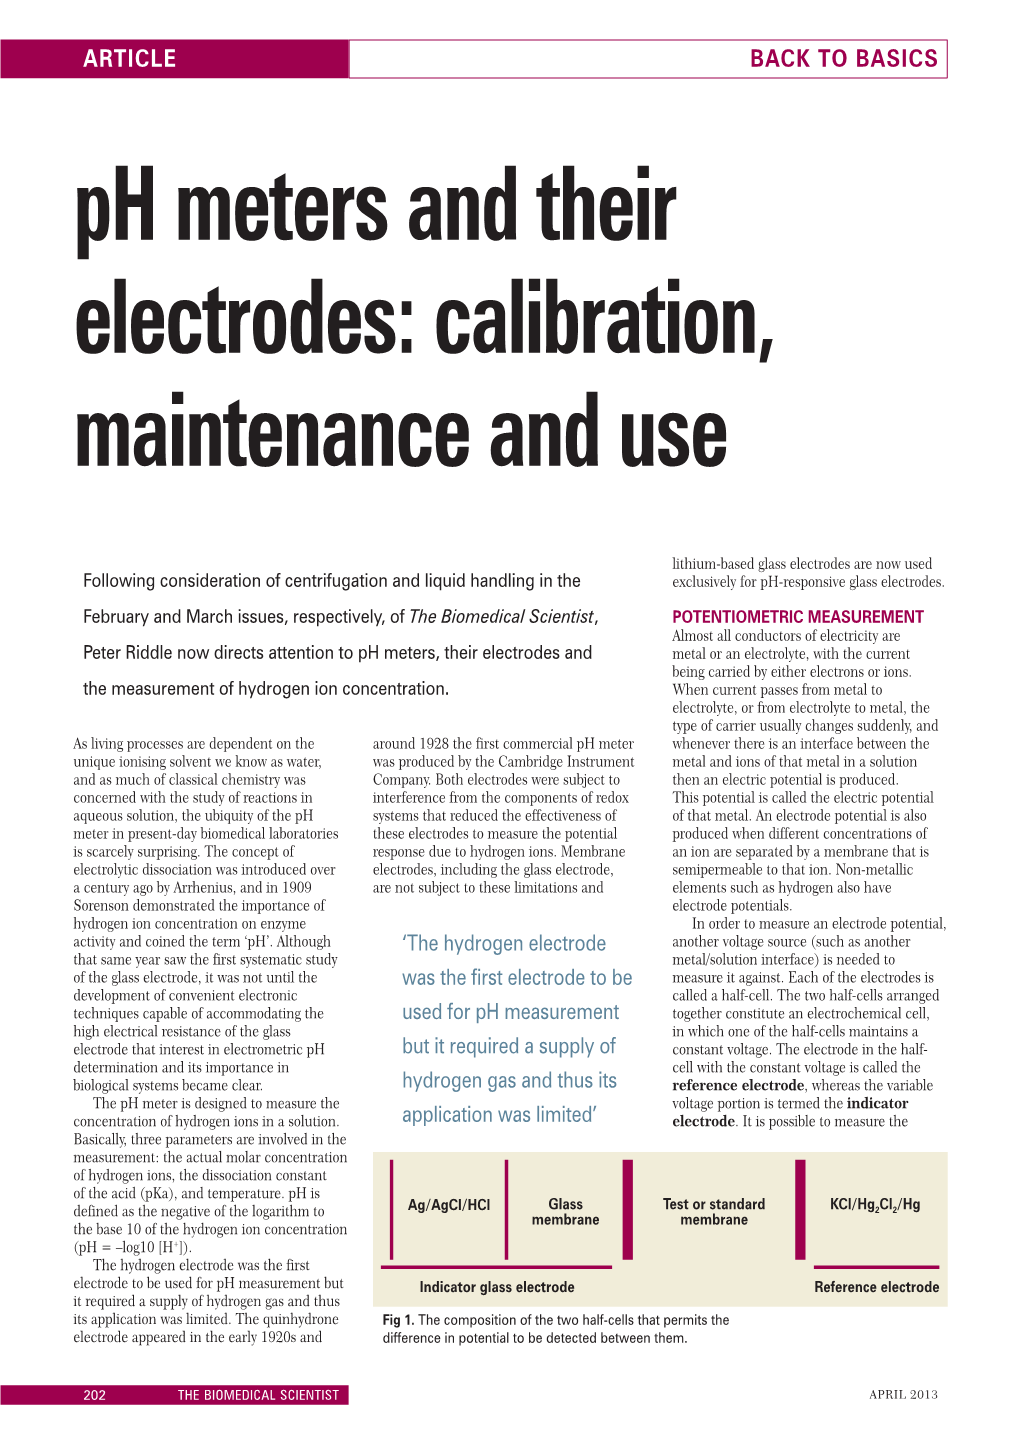 Ph Meters and Their Electrodes: Calibration, Maintenance and Use